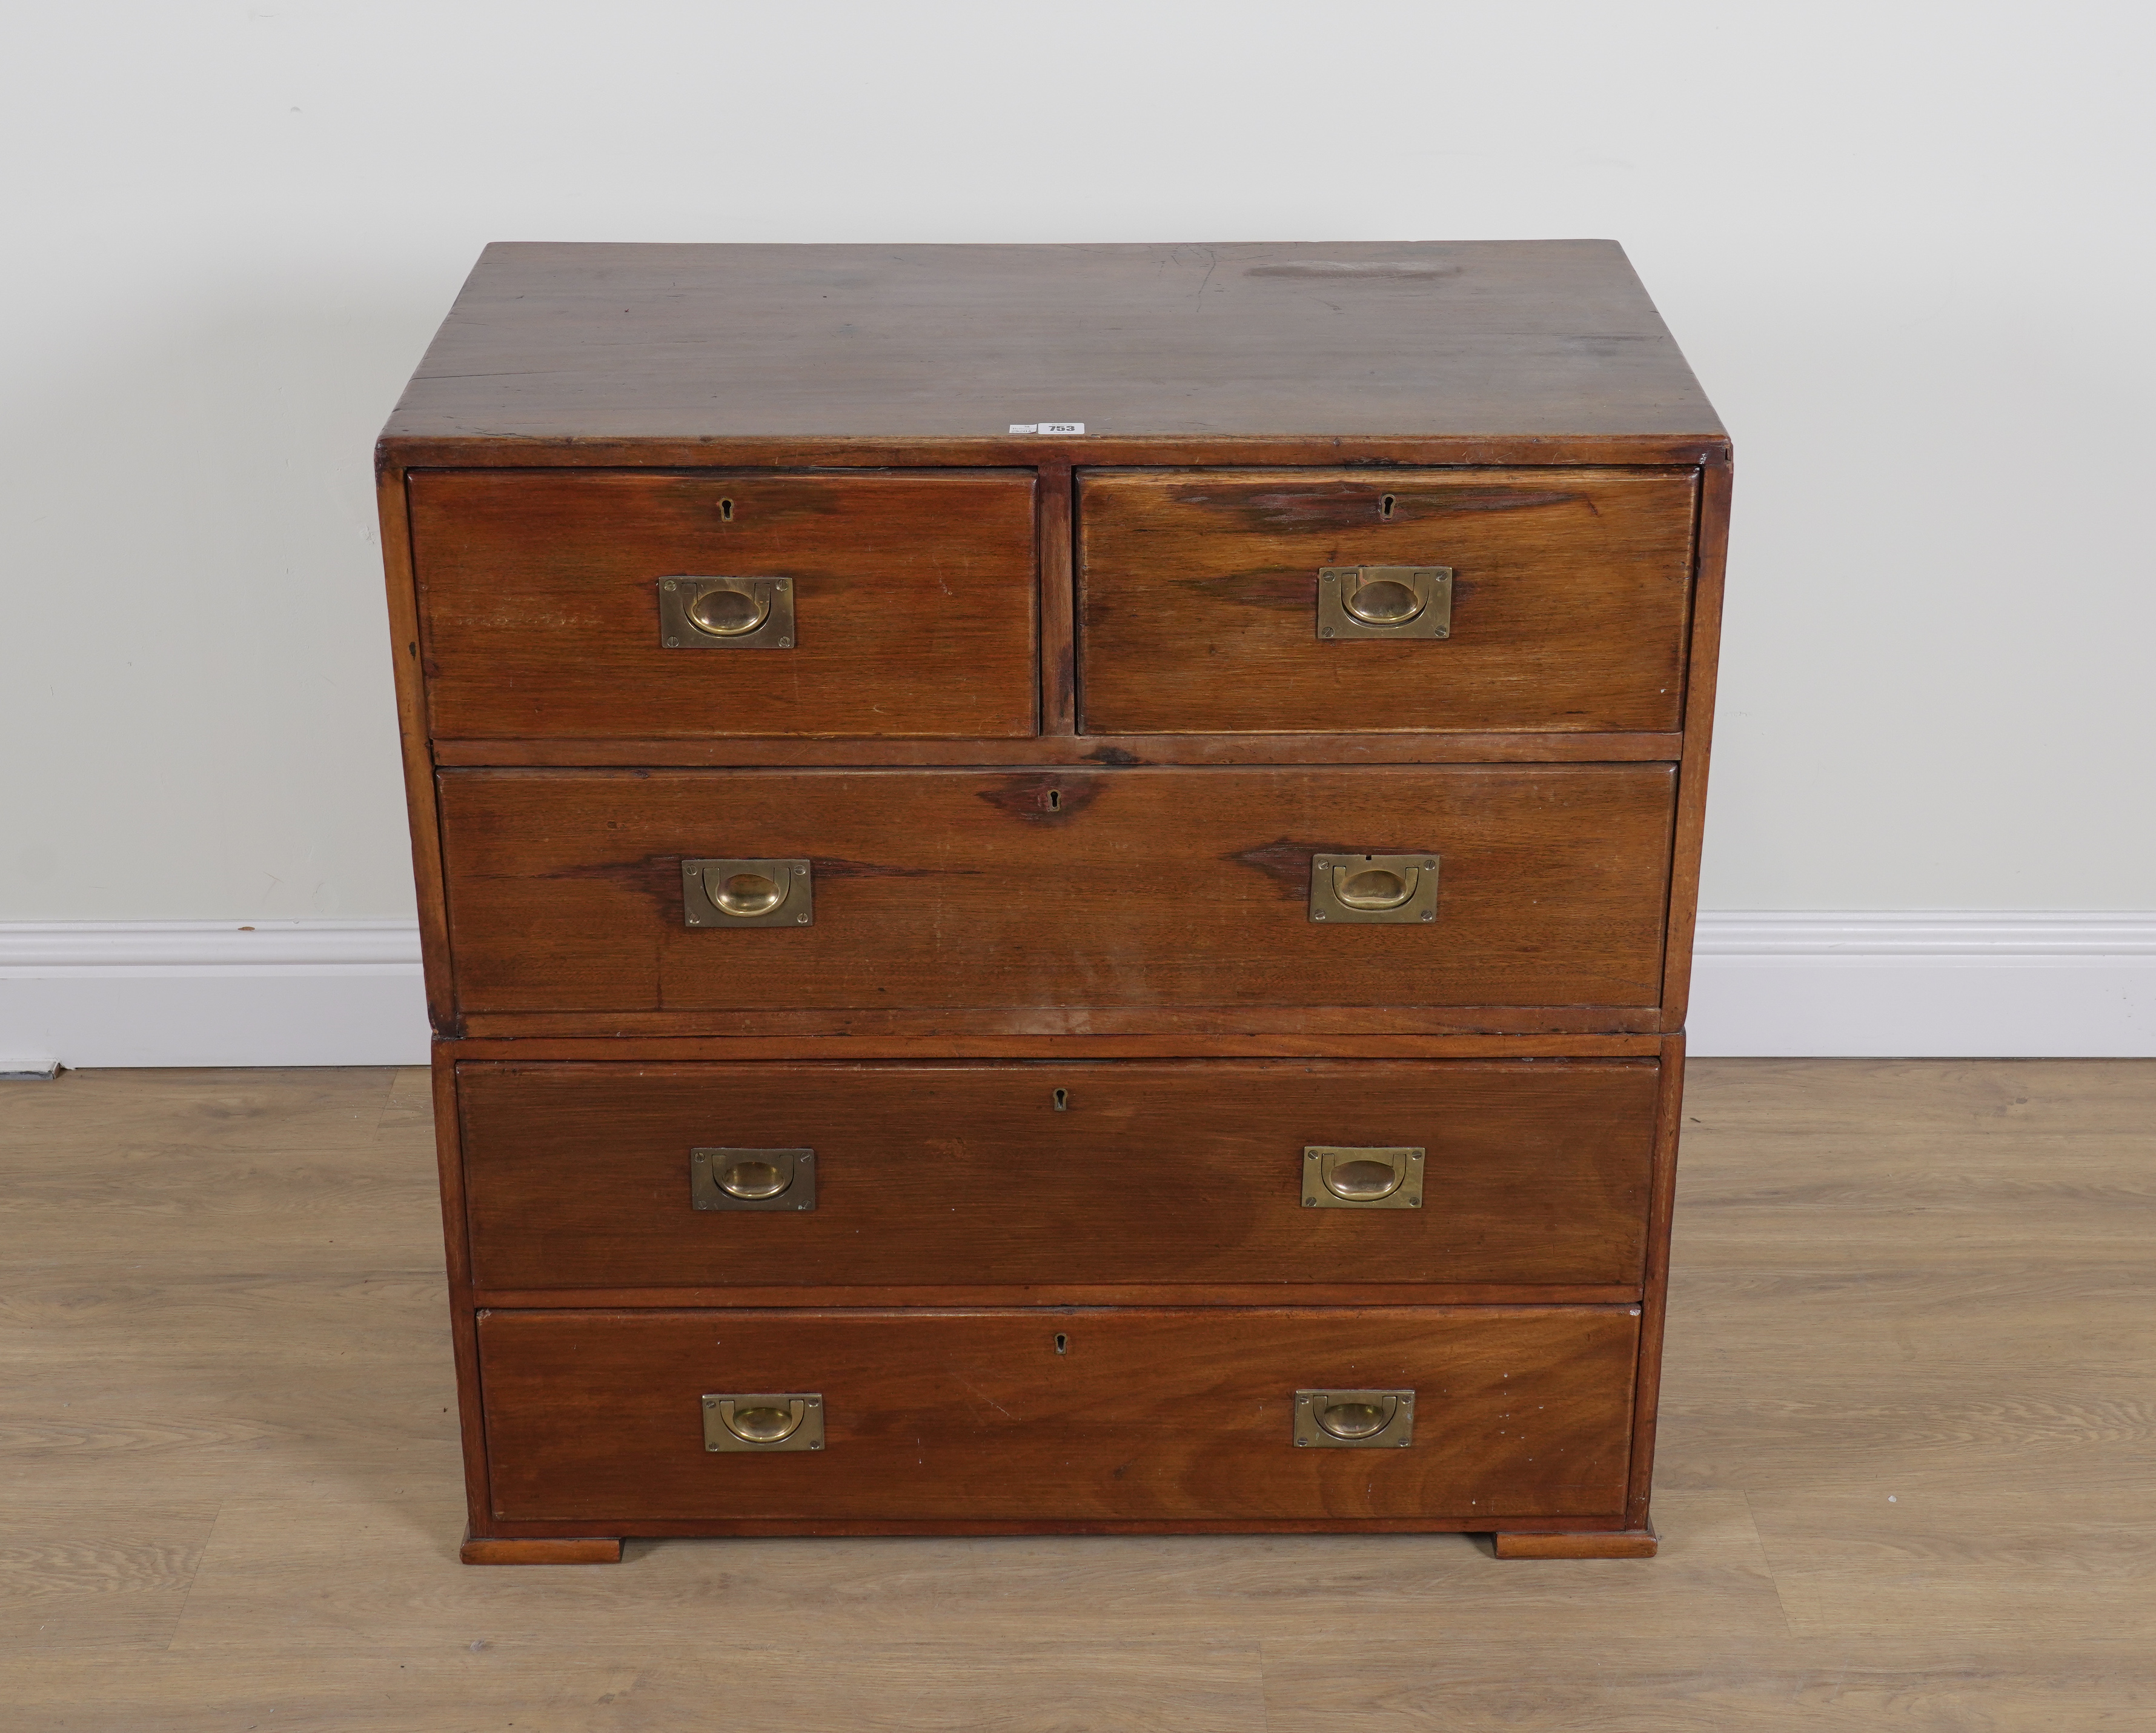 AN EARLY 20TH CENTURY TEAK FIVE DRAWER TWO PART CAMPAIGN STYLE CHEST - Image 3 of 4